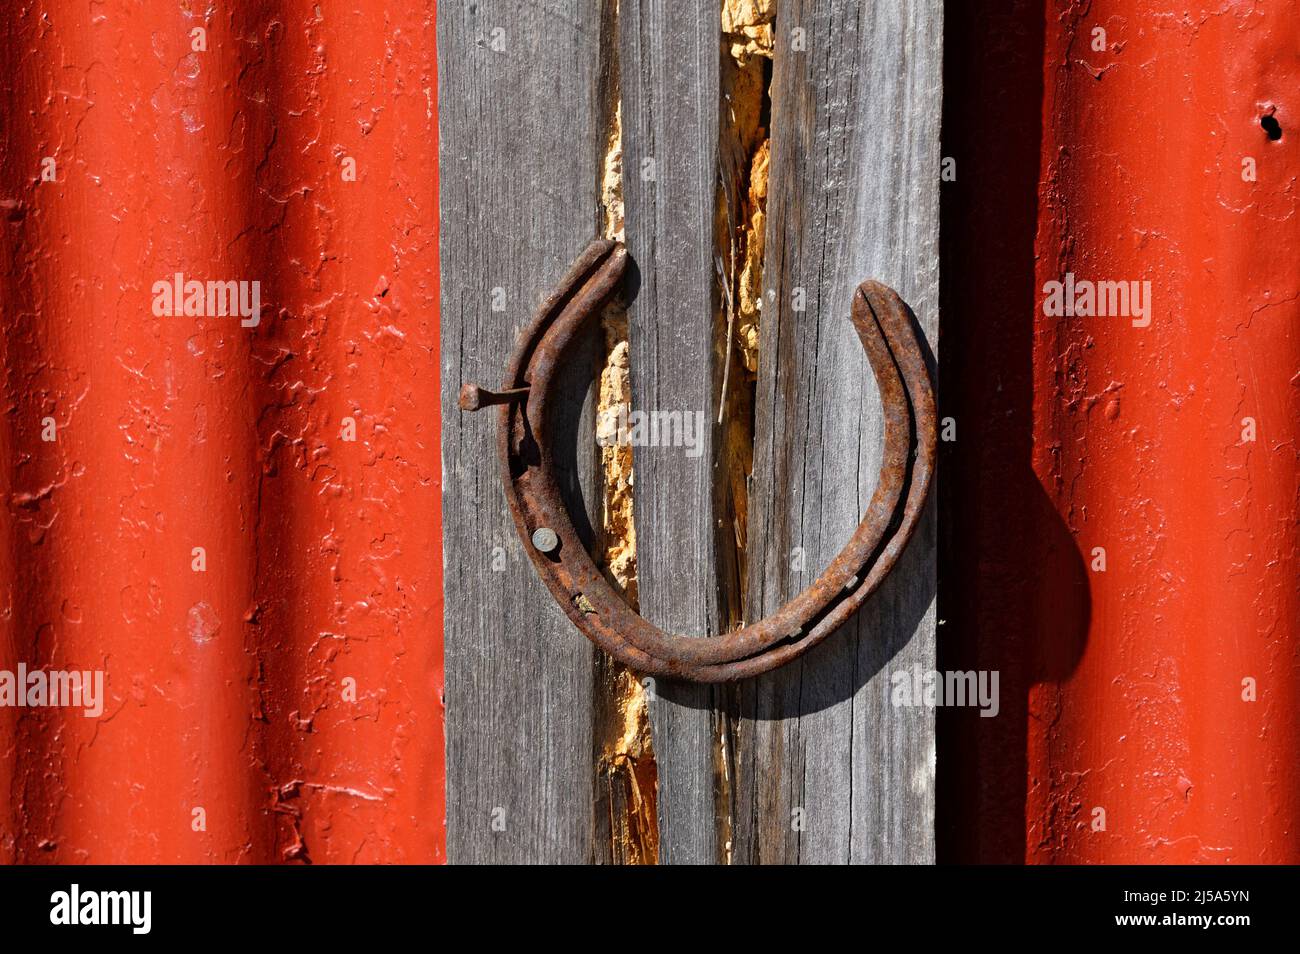 A hoof nail protrudes from a rusty horse shoe Stock Photo